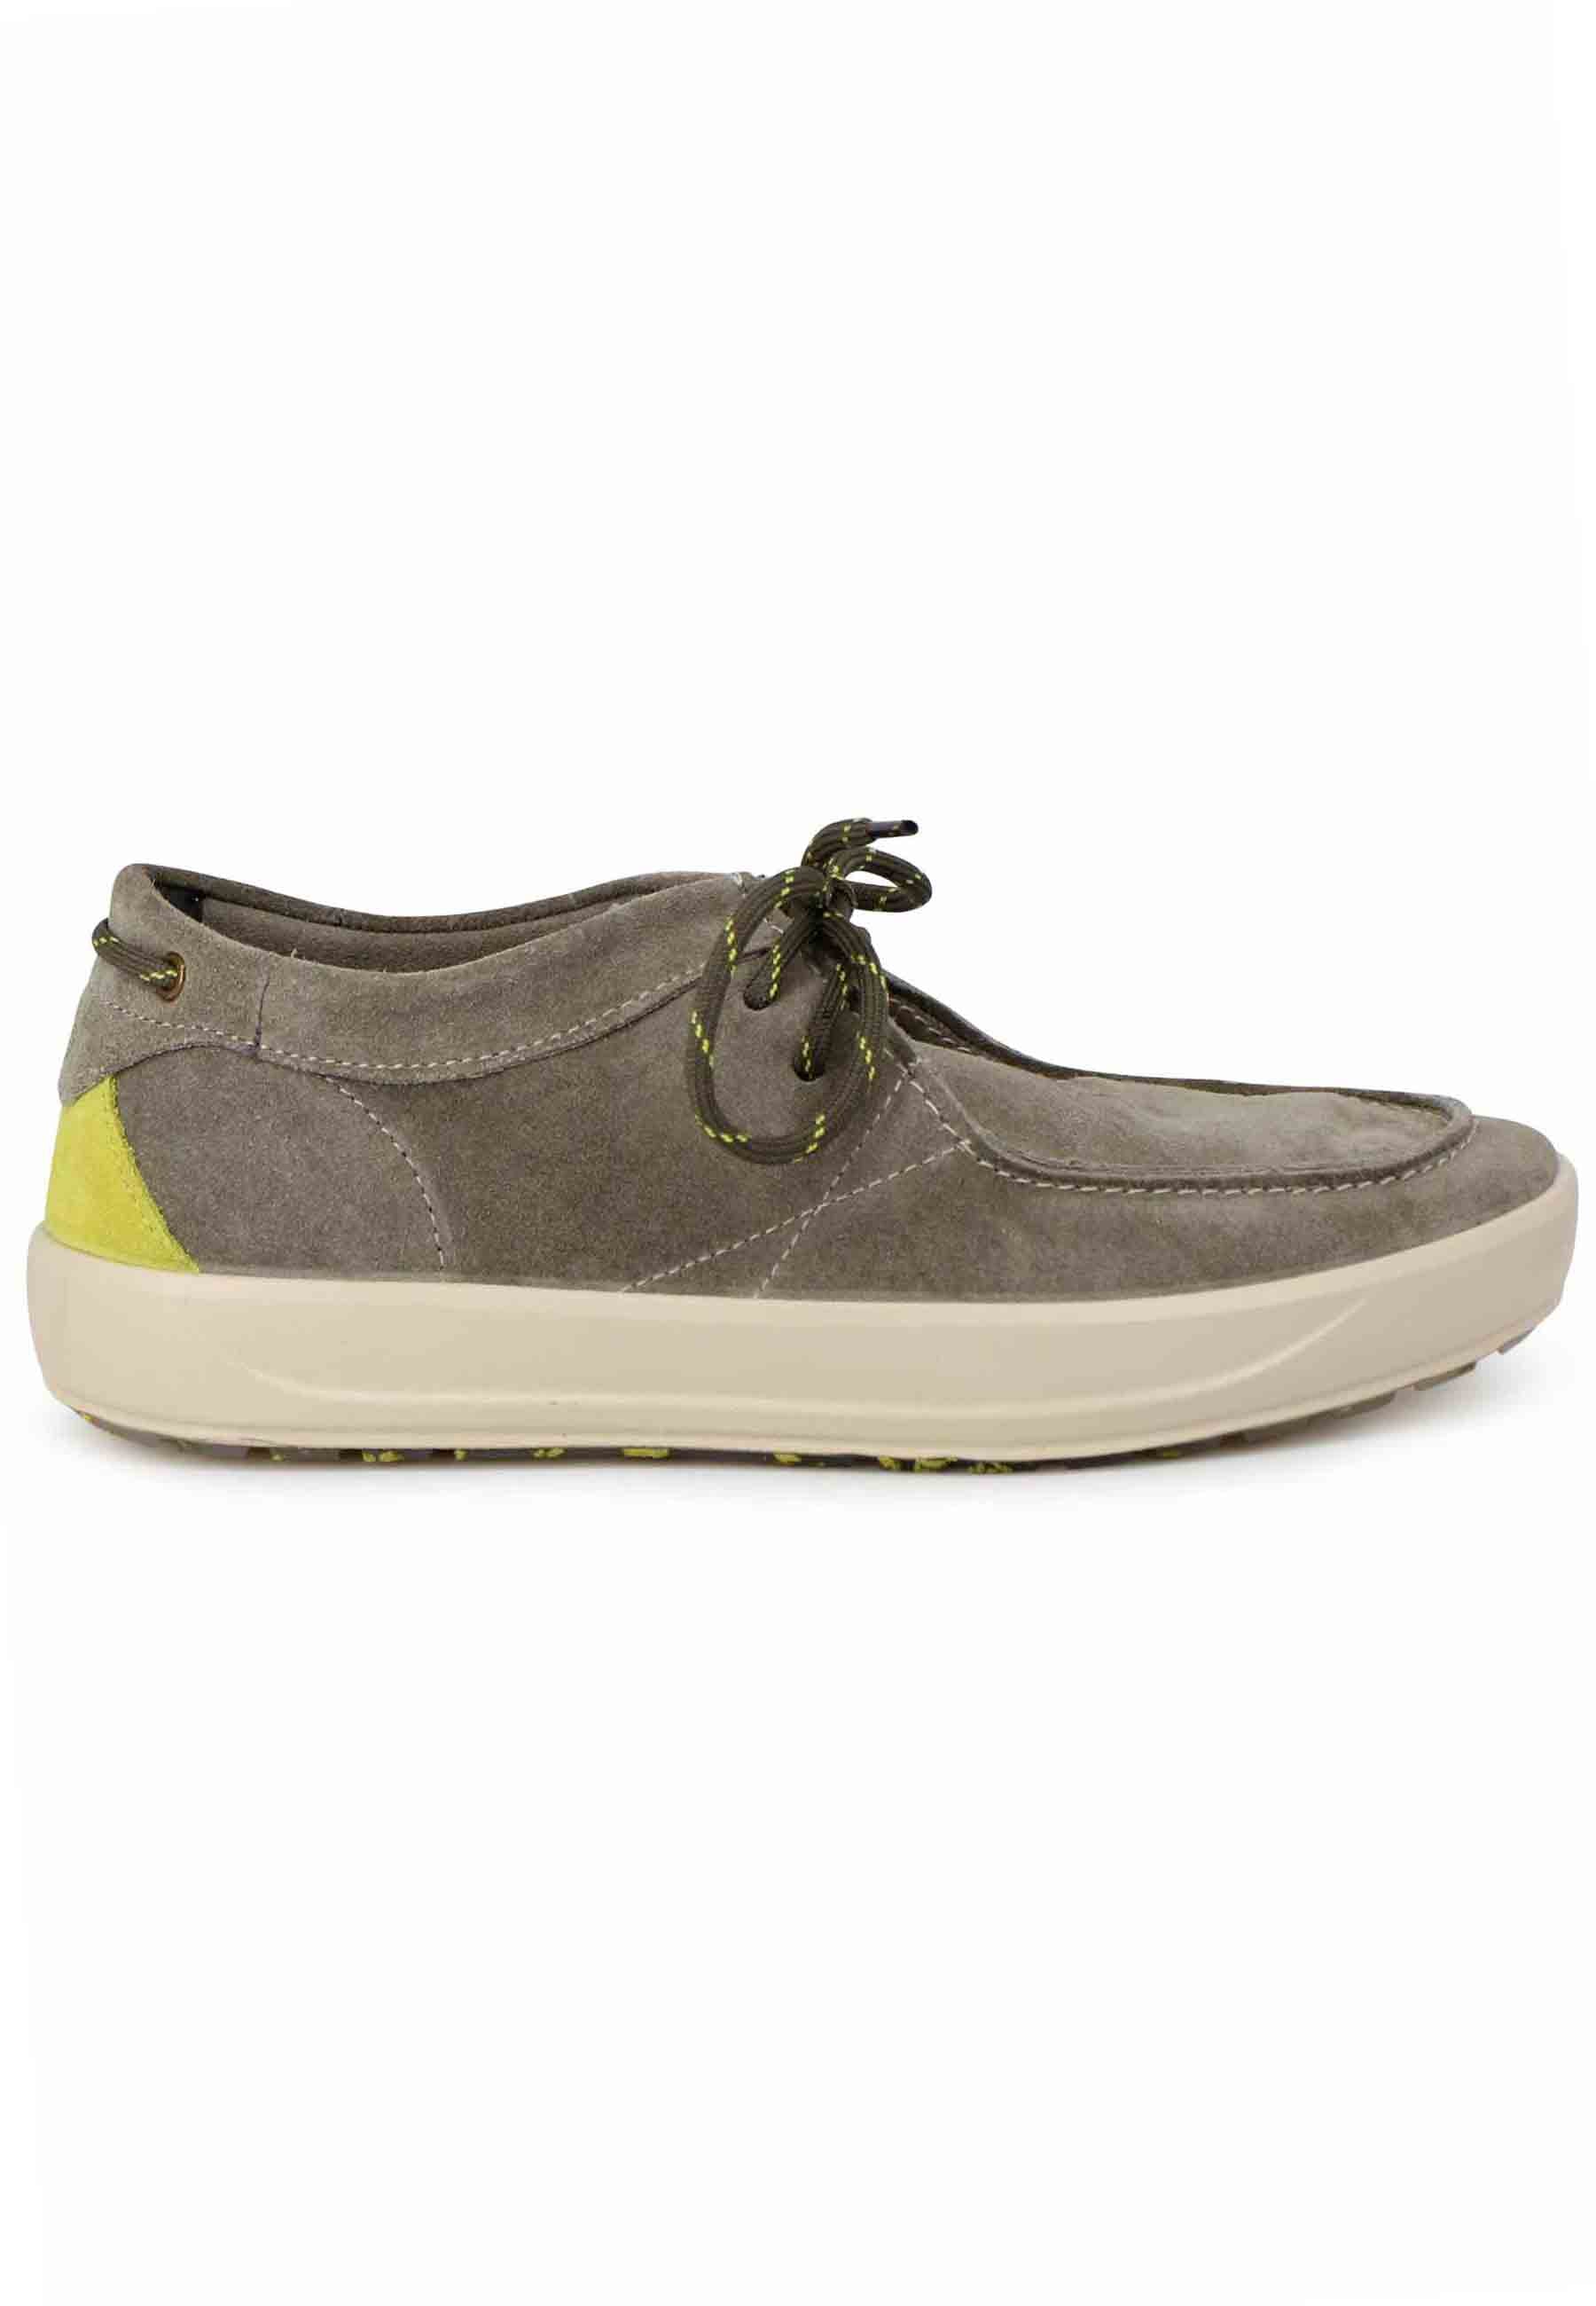 Bob Cat men's lace-ups in green suede with rubber sole